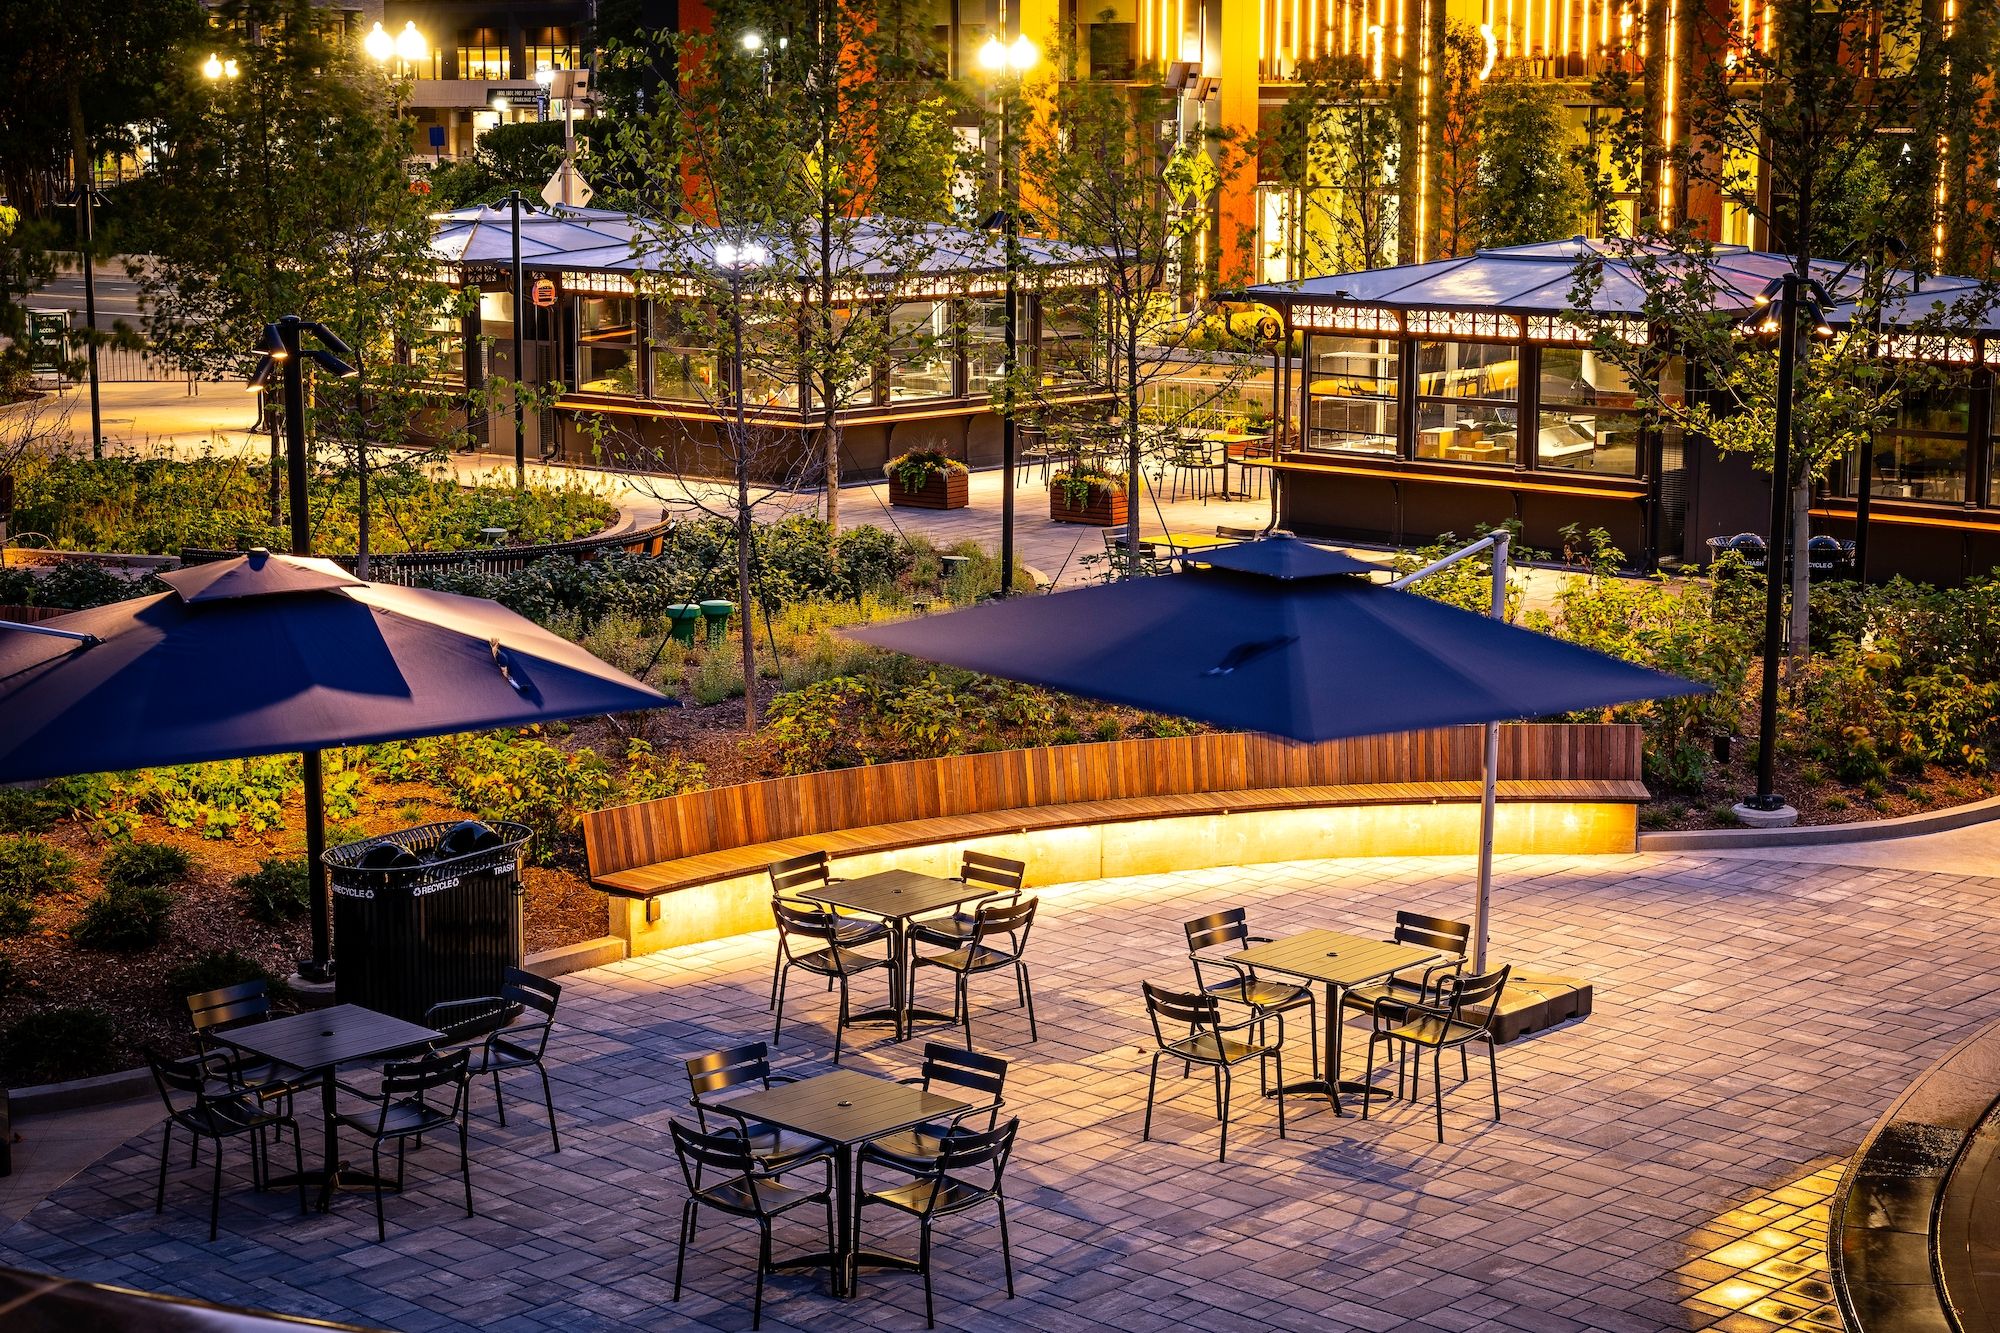 An outdoor park lit up at night with chairs, umbrellas, and food kiosks